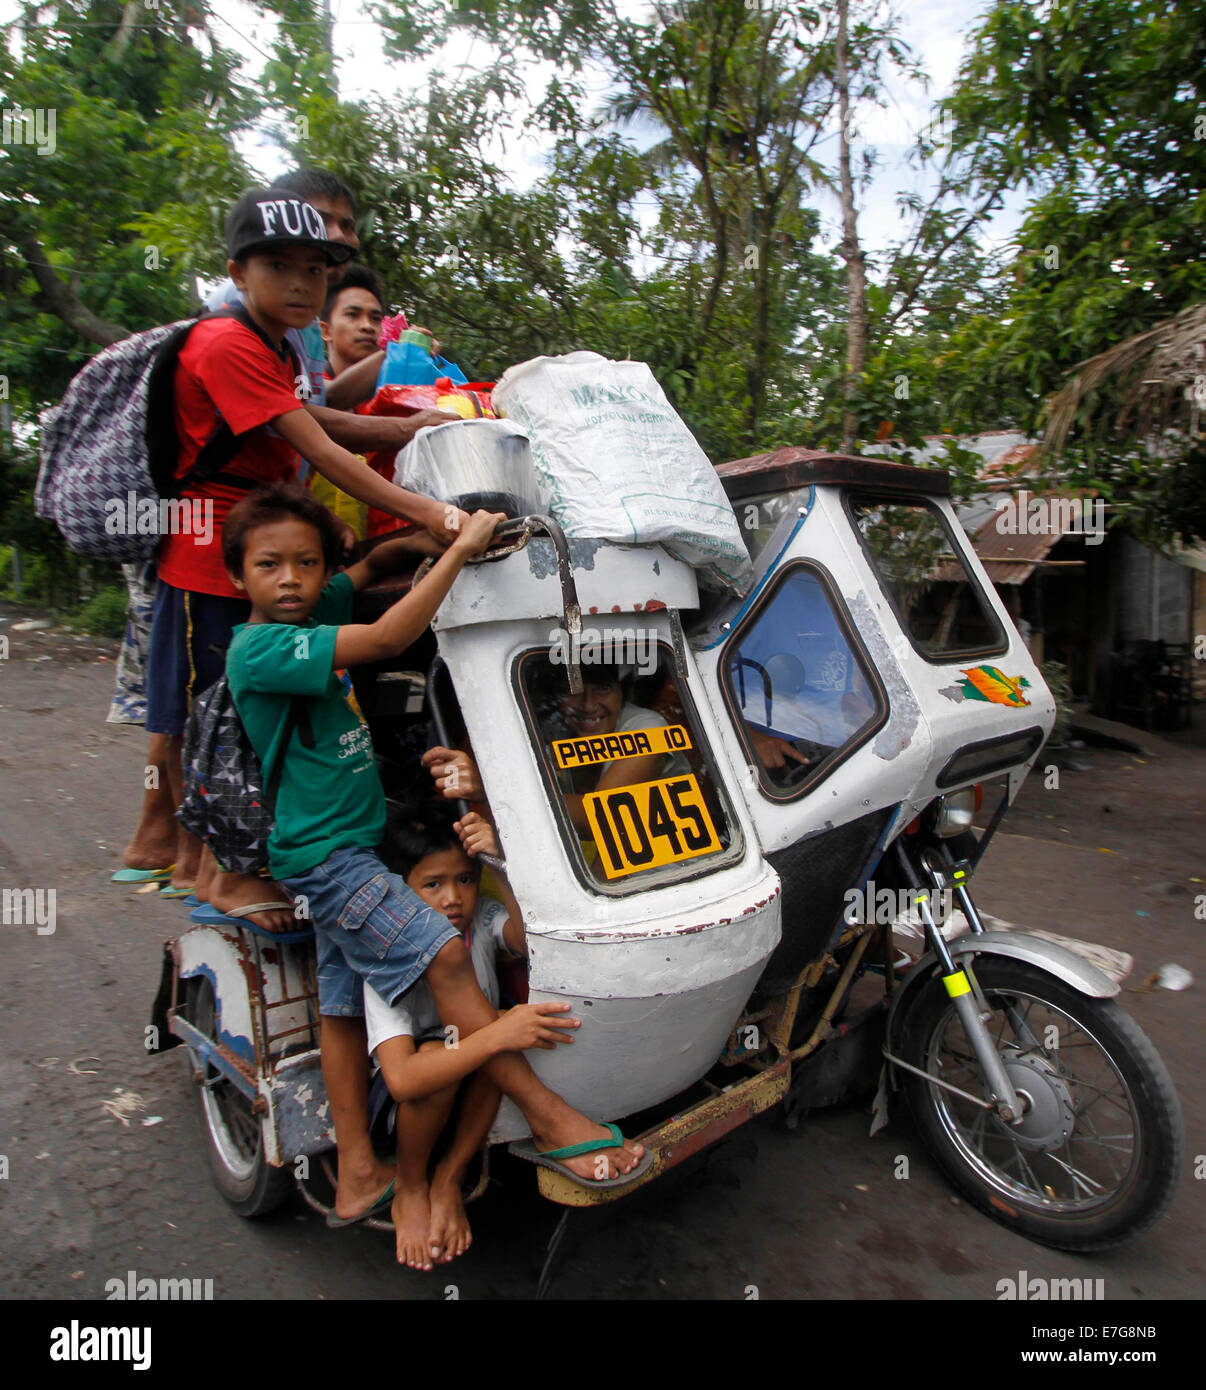 Albay, Philippines. 17th Sep, 2014. Residents crowd on a tricycle as they evacuate from the danger zone near the Mayon Volcano in Albay Province, the Philippines, Sept. 17, 2014. The Philippine Institute of Volcanology and Seismology (PHIVOLCS) said Wednesday that Mayon Volcano in the eastern Philippine province of Albay has exhibited 'intense activity' based on its 24-hour observation. Credit:  Stringer/Xinhua/Alamy Live News Stock Photo